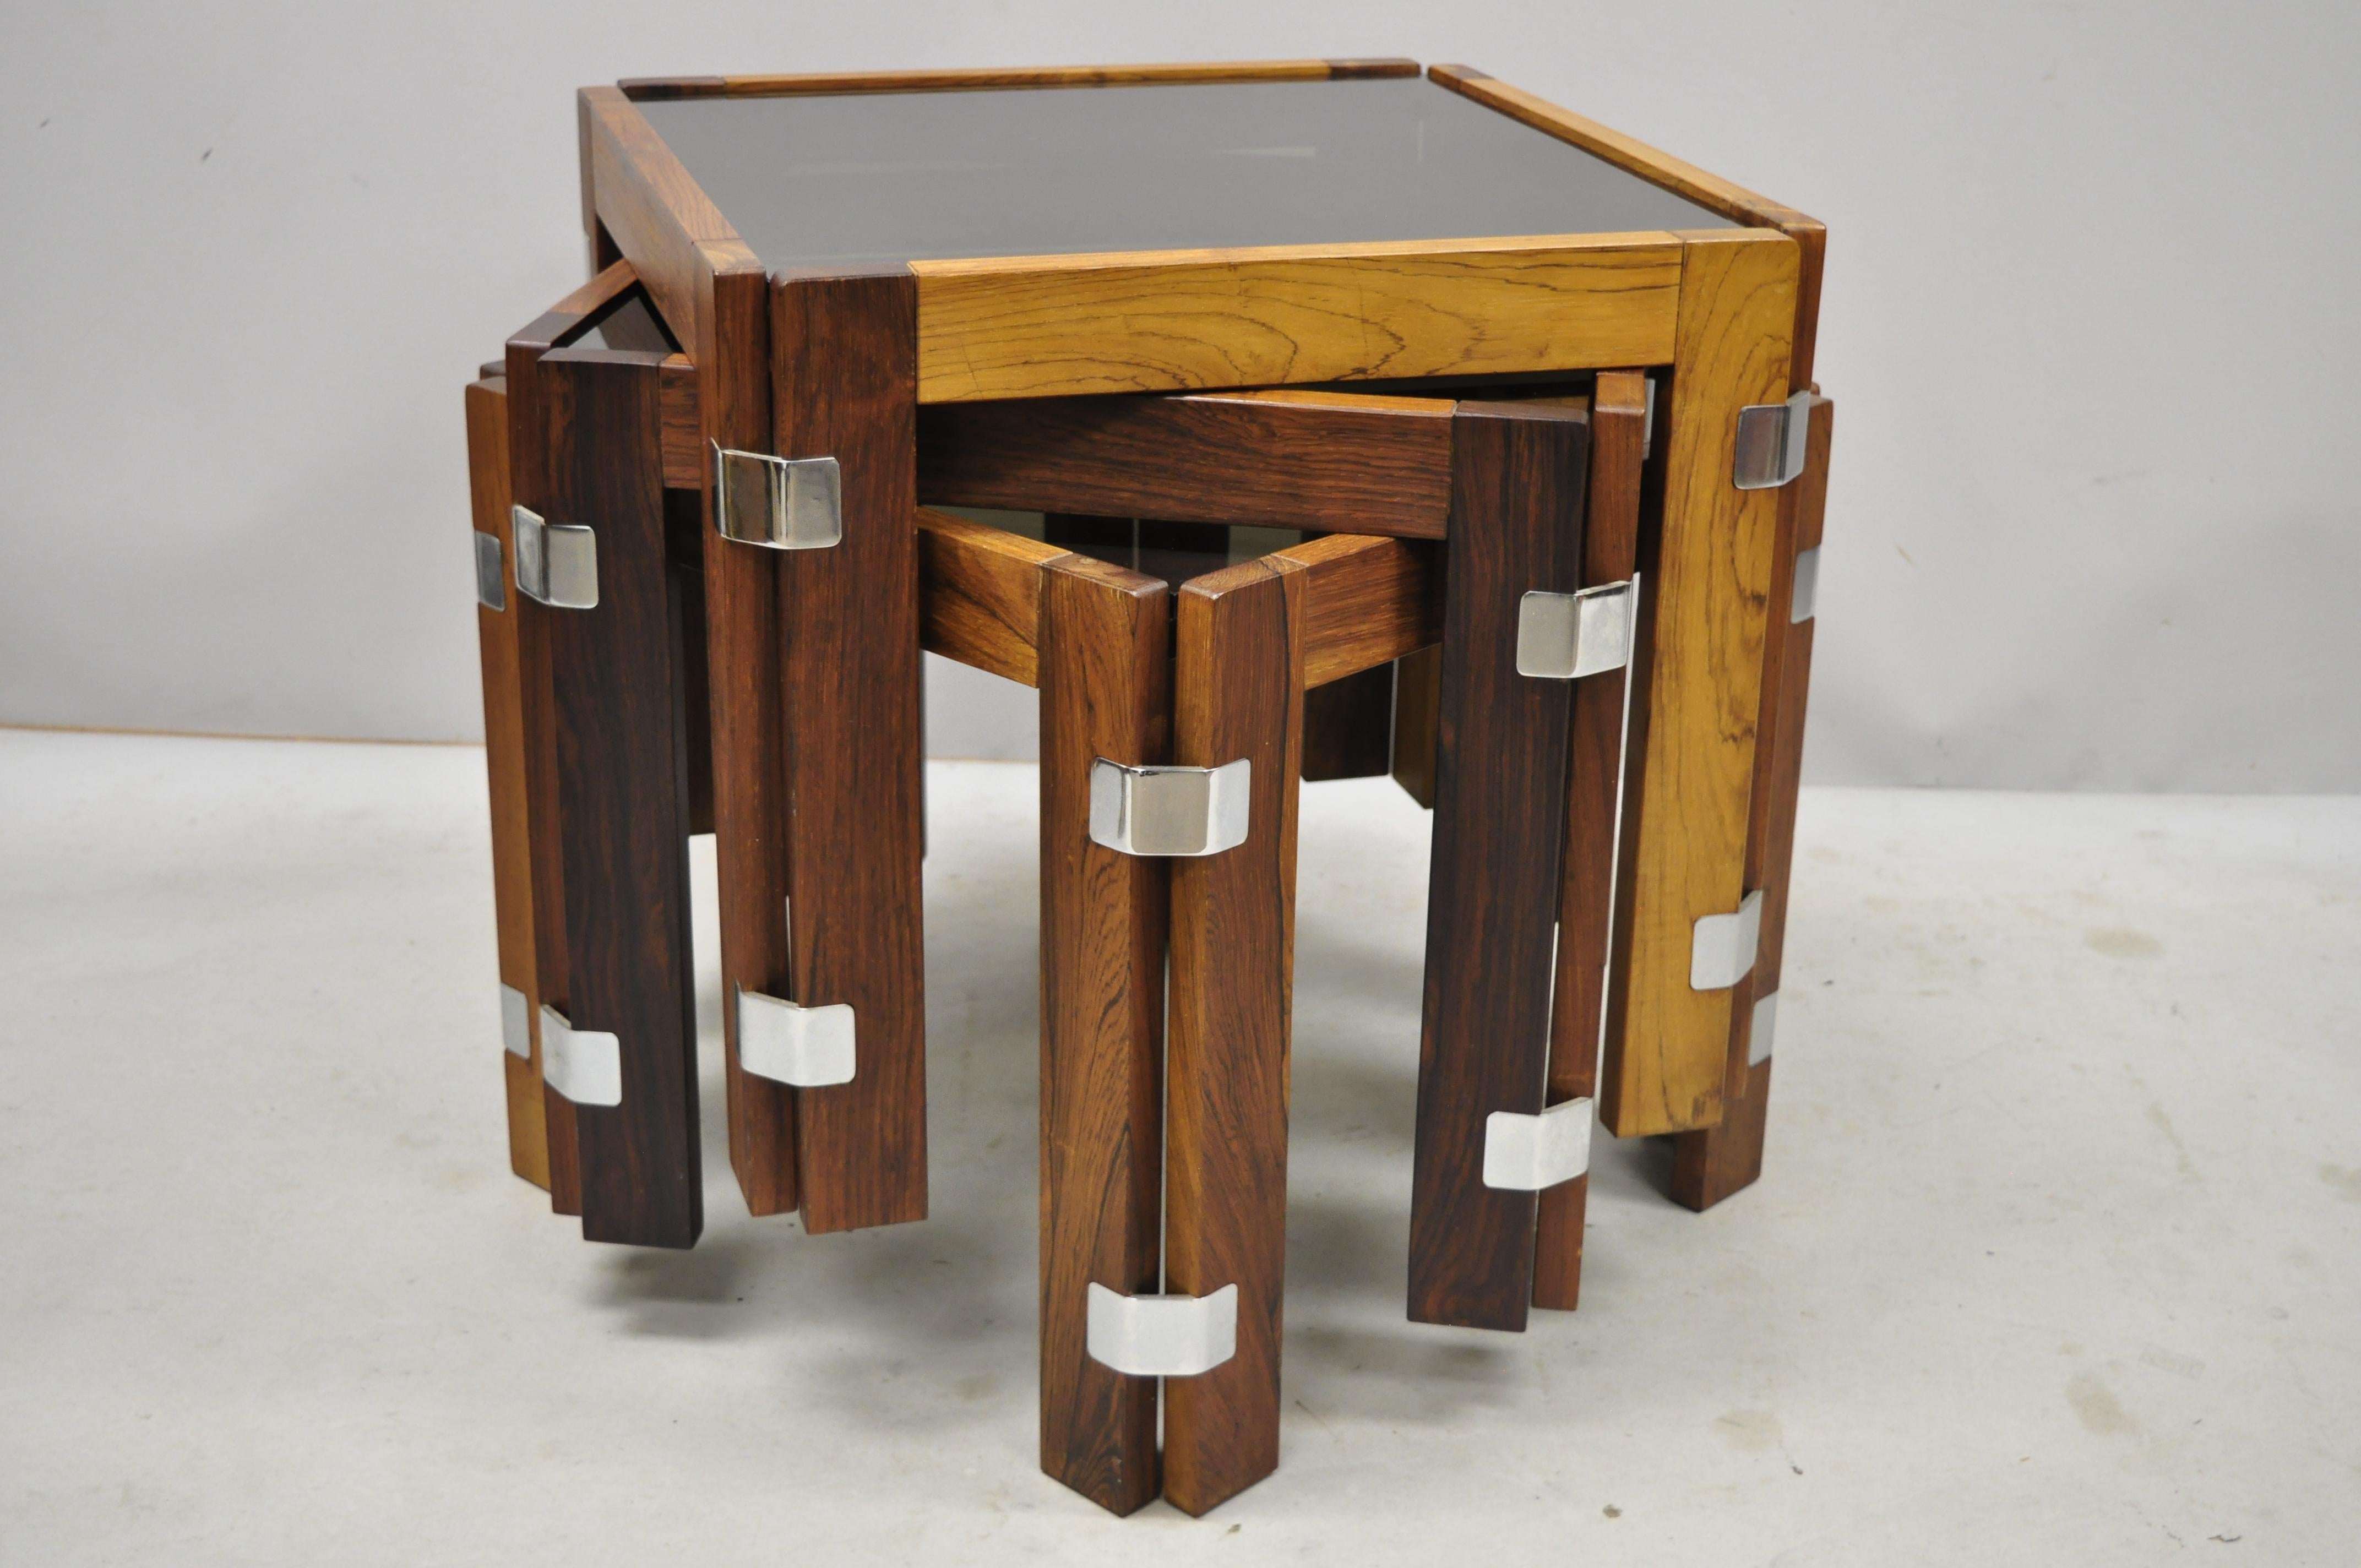 Set of 3 midcentury Danish modern rosewood and smoked glass side tables by interior form. Listing includes polished metal joinery, nesting form, smoked glass tops, solid wood construction, beautiful wood grain, original label, clean modernist lines,